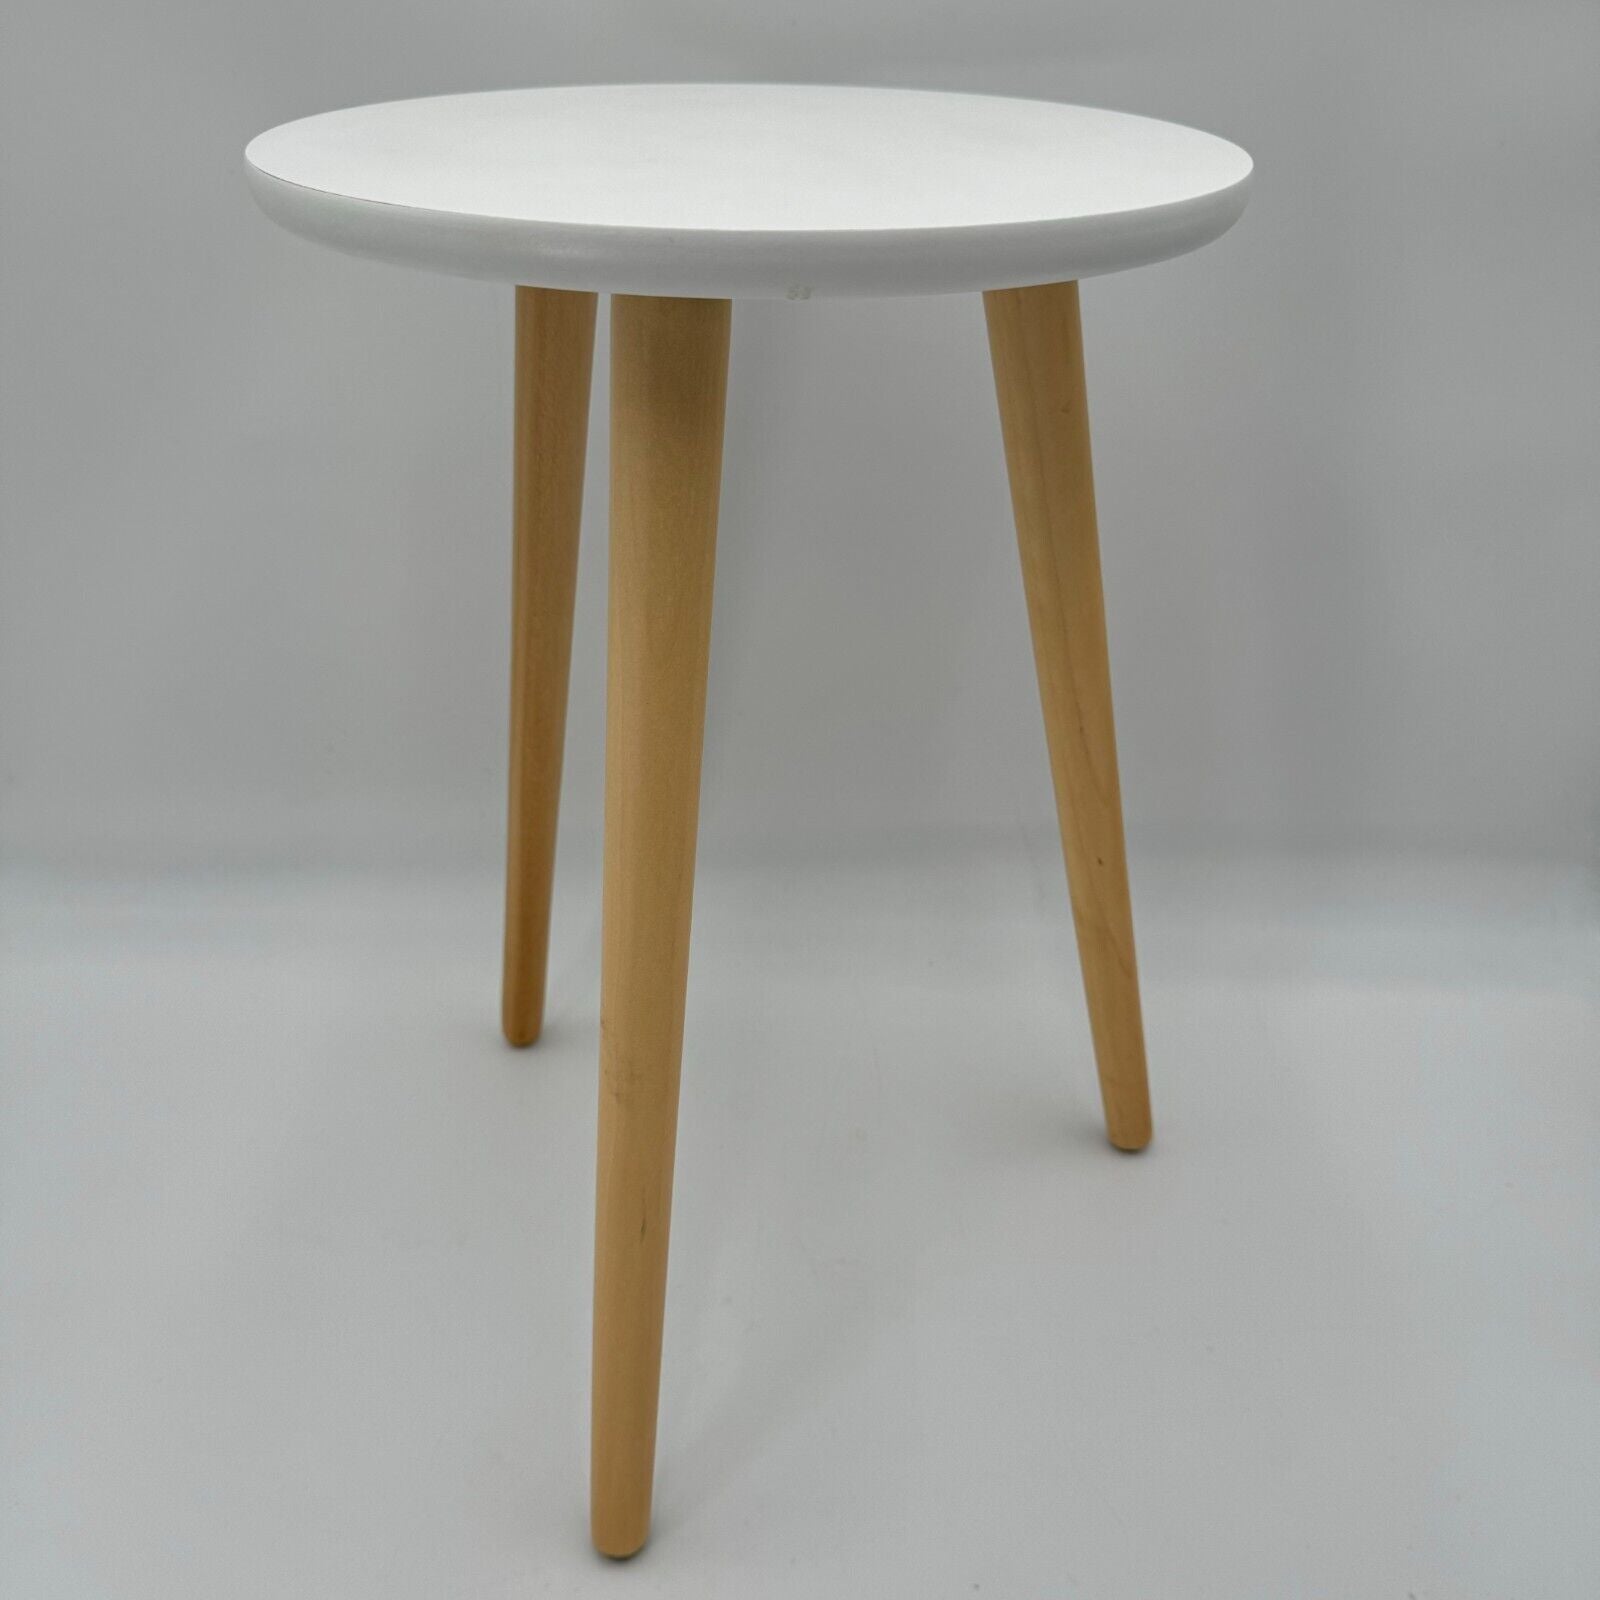 End Table White Round Top 3 Light Stained Wood Legs Screw In Easy Assembly